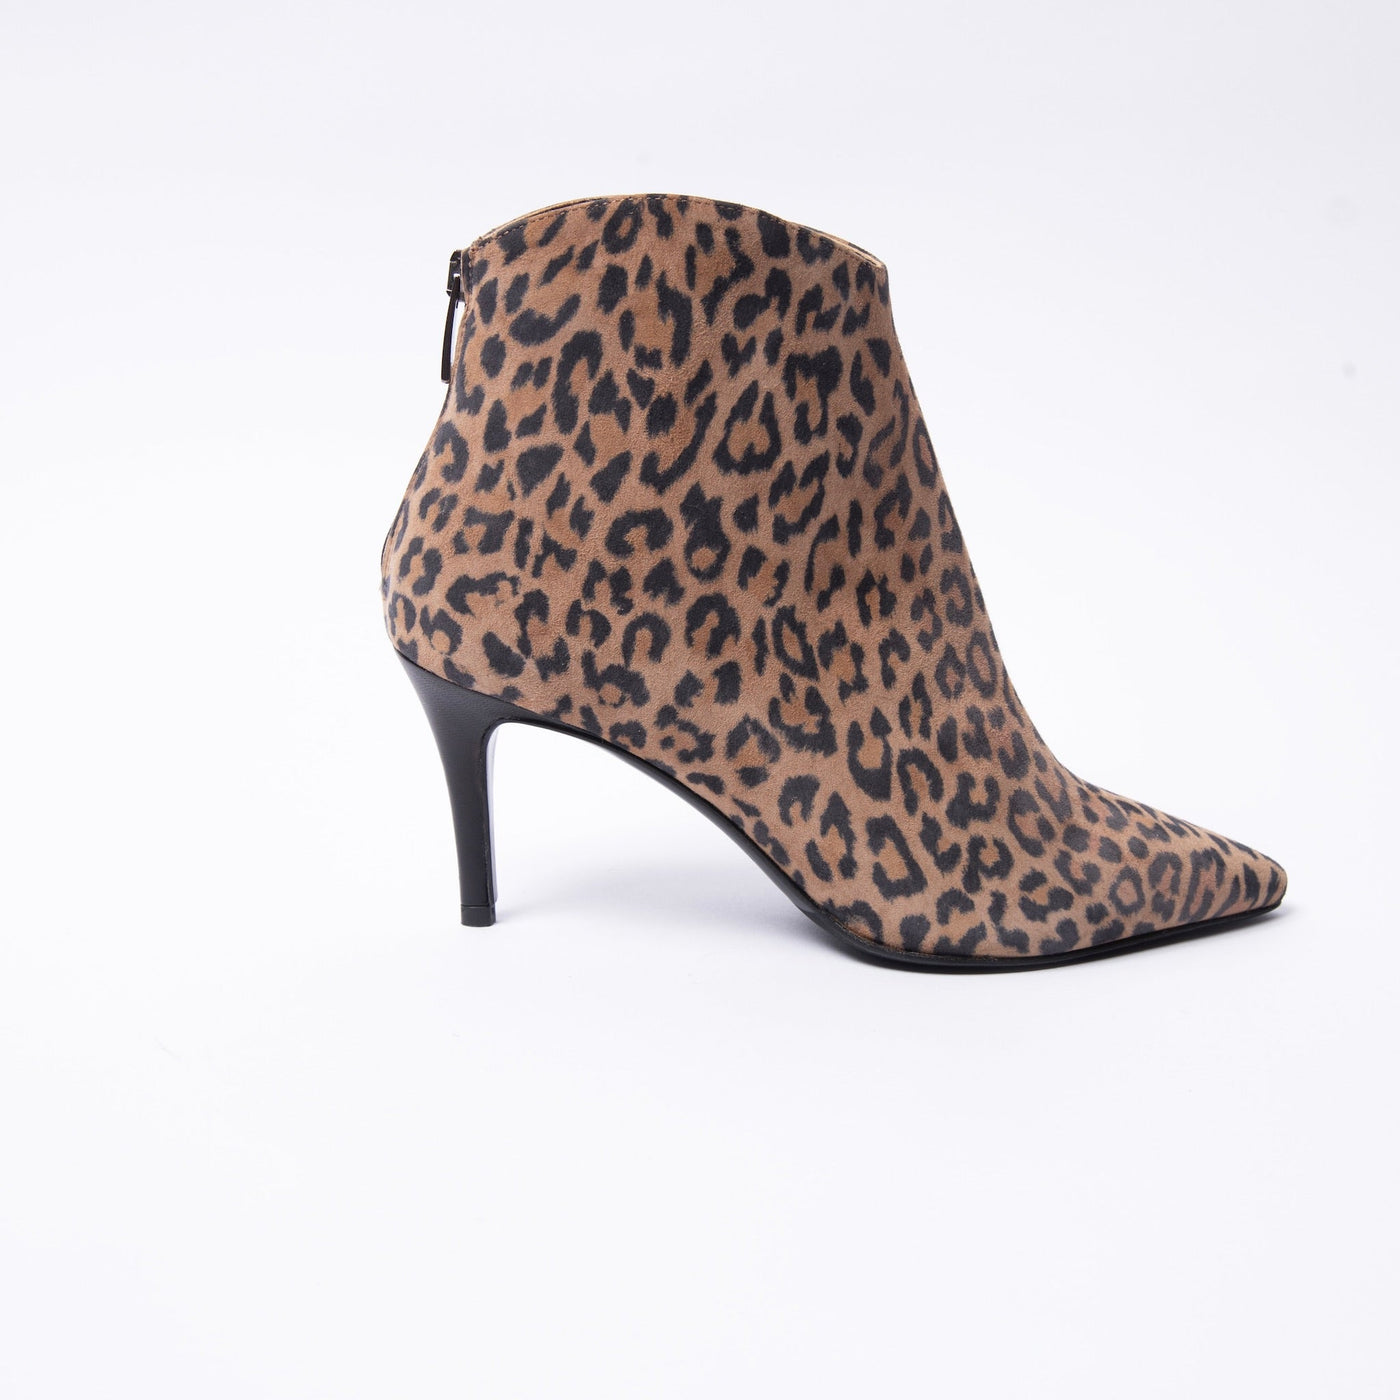 Ankle boots in leopard printed suede. 